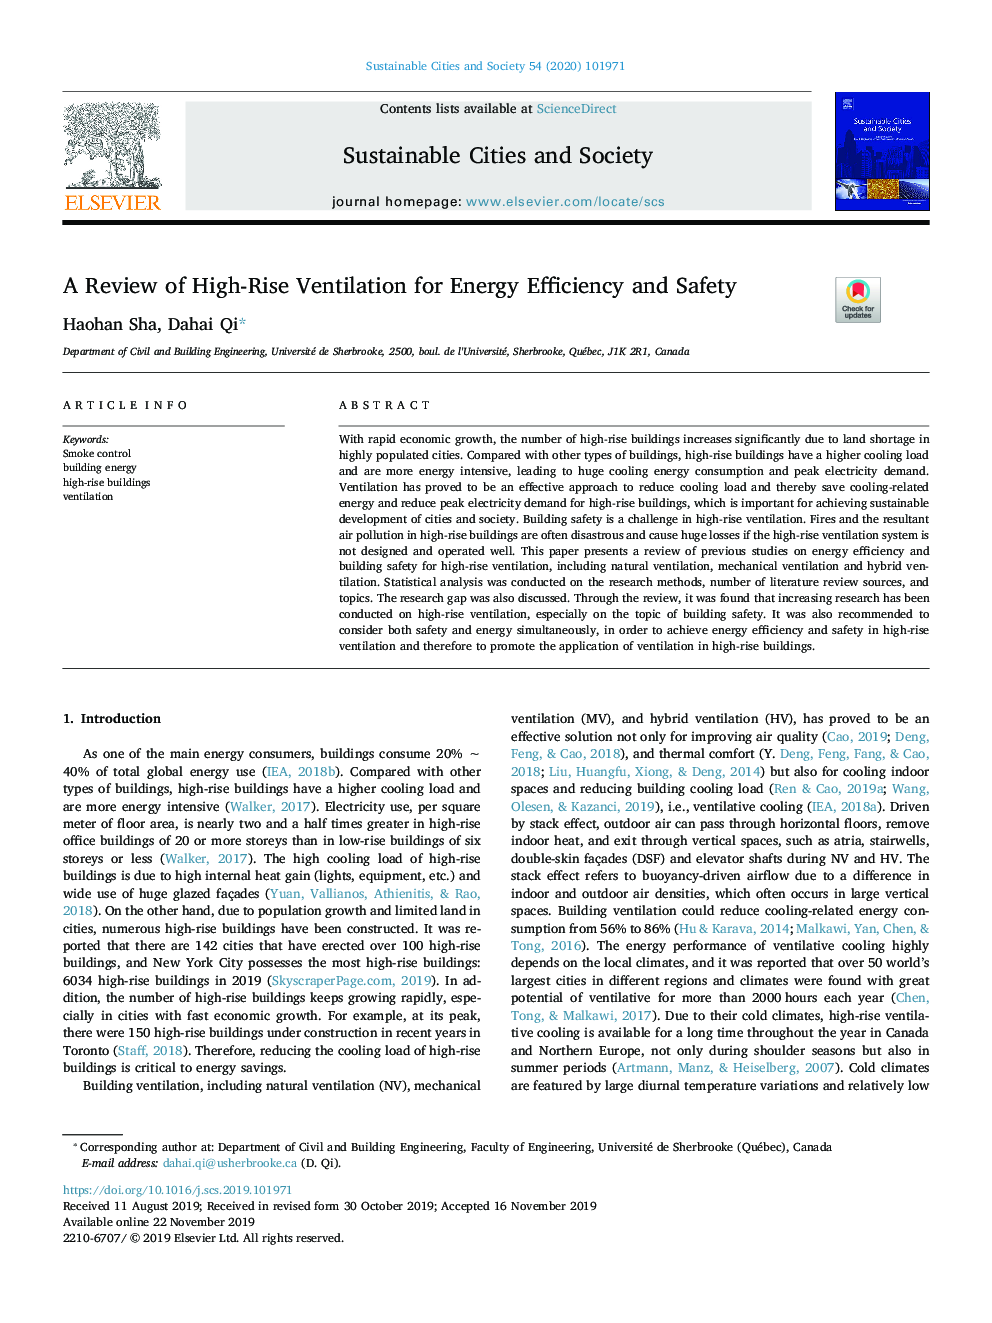 A Review of High-Rise Ventilation for Energy Efficiency and Safety